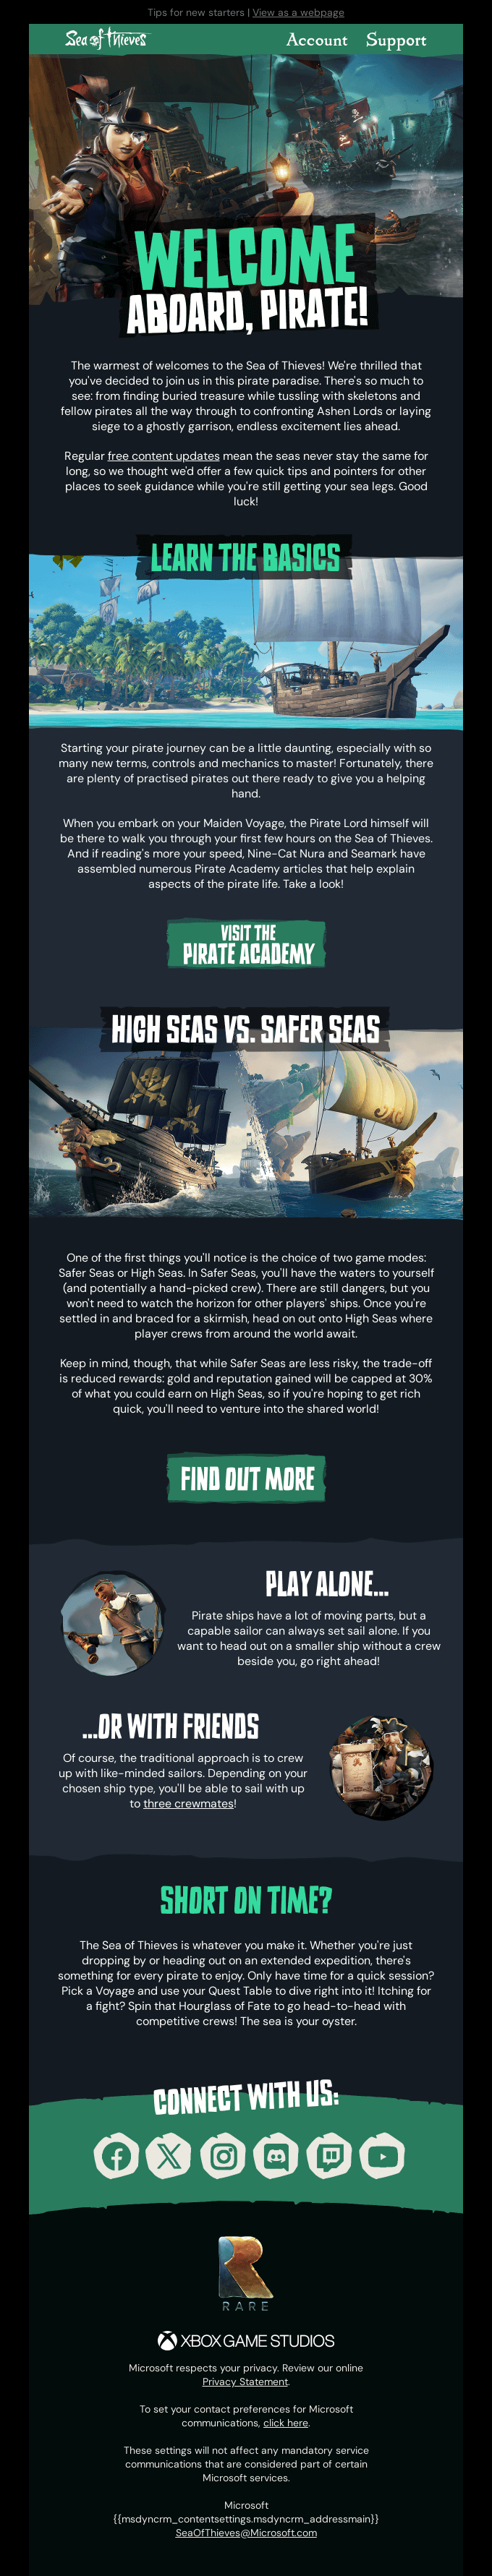 Personalized user onboarding email - Sea of Thieves examples